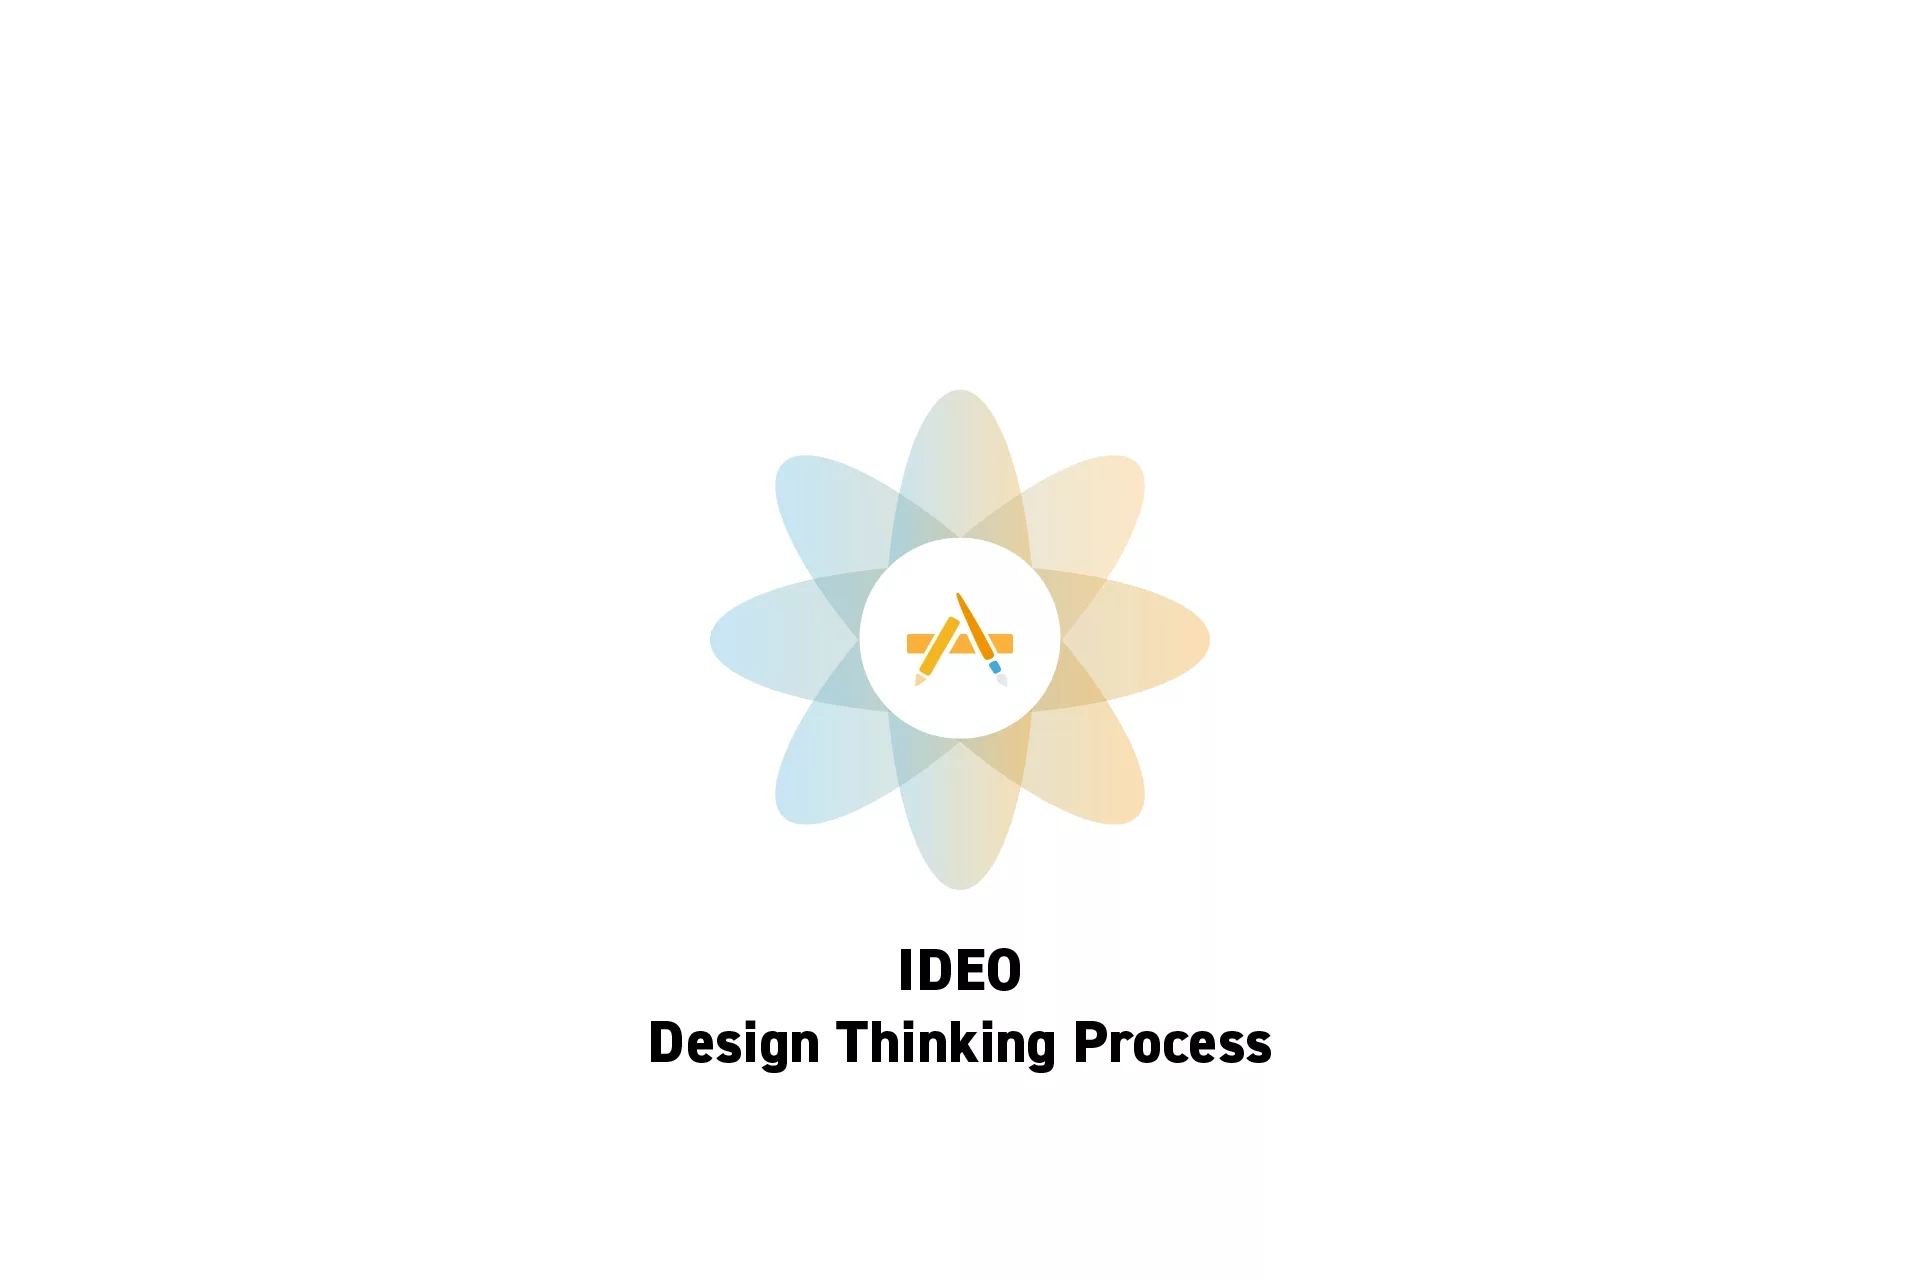 A flower that represents Digital Craft with the text “IDEO Design Thinking Process” beneath it.